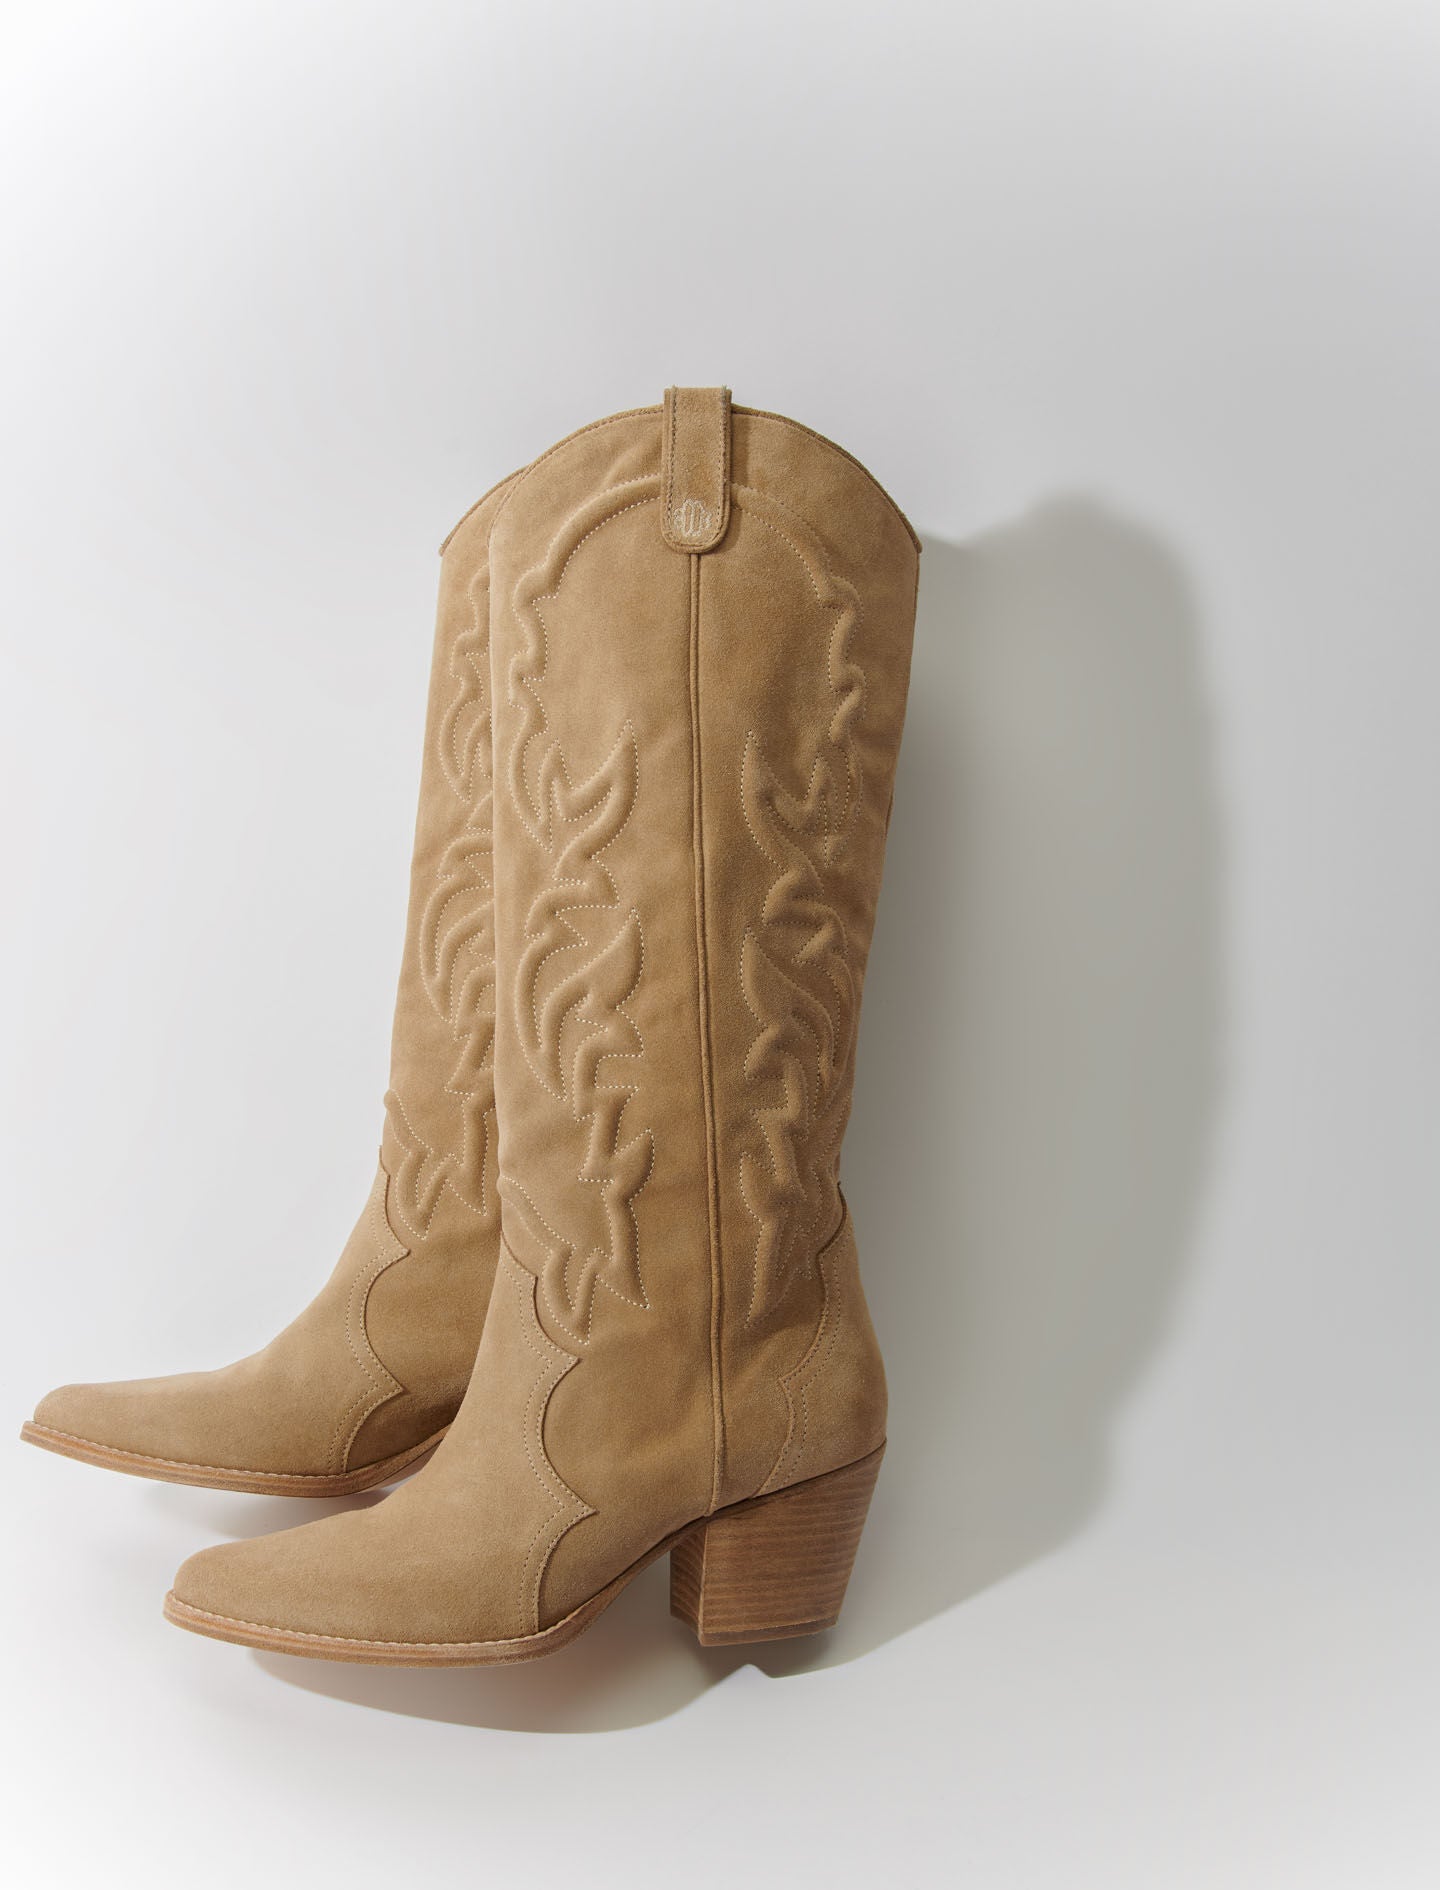 Beige-embroidered leather cowboy boots